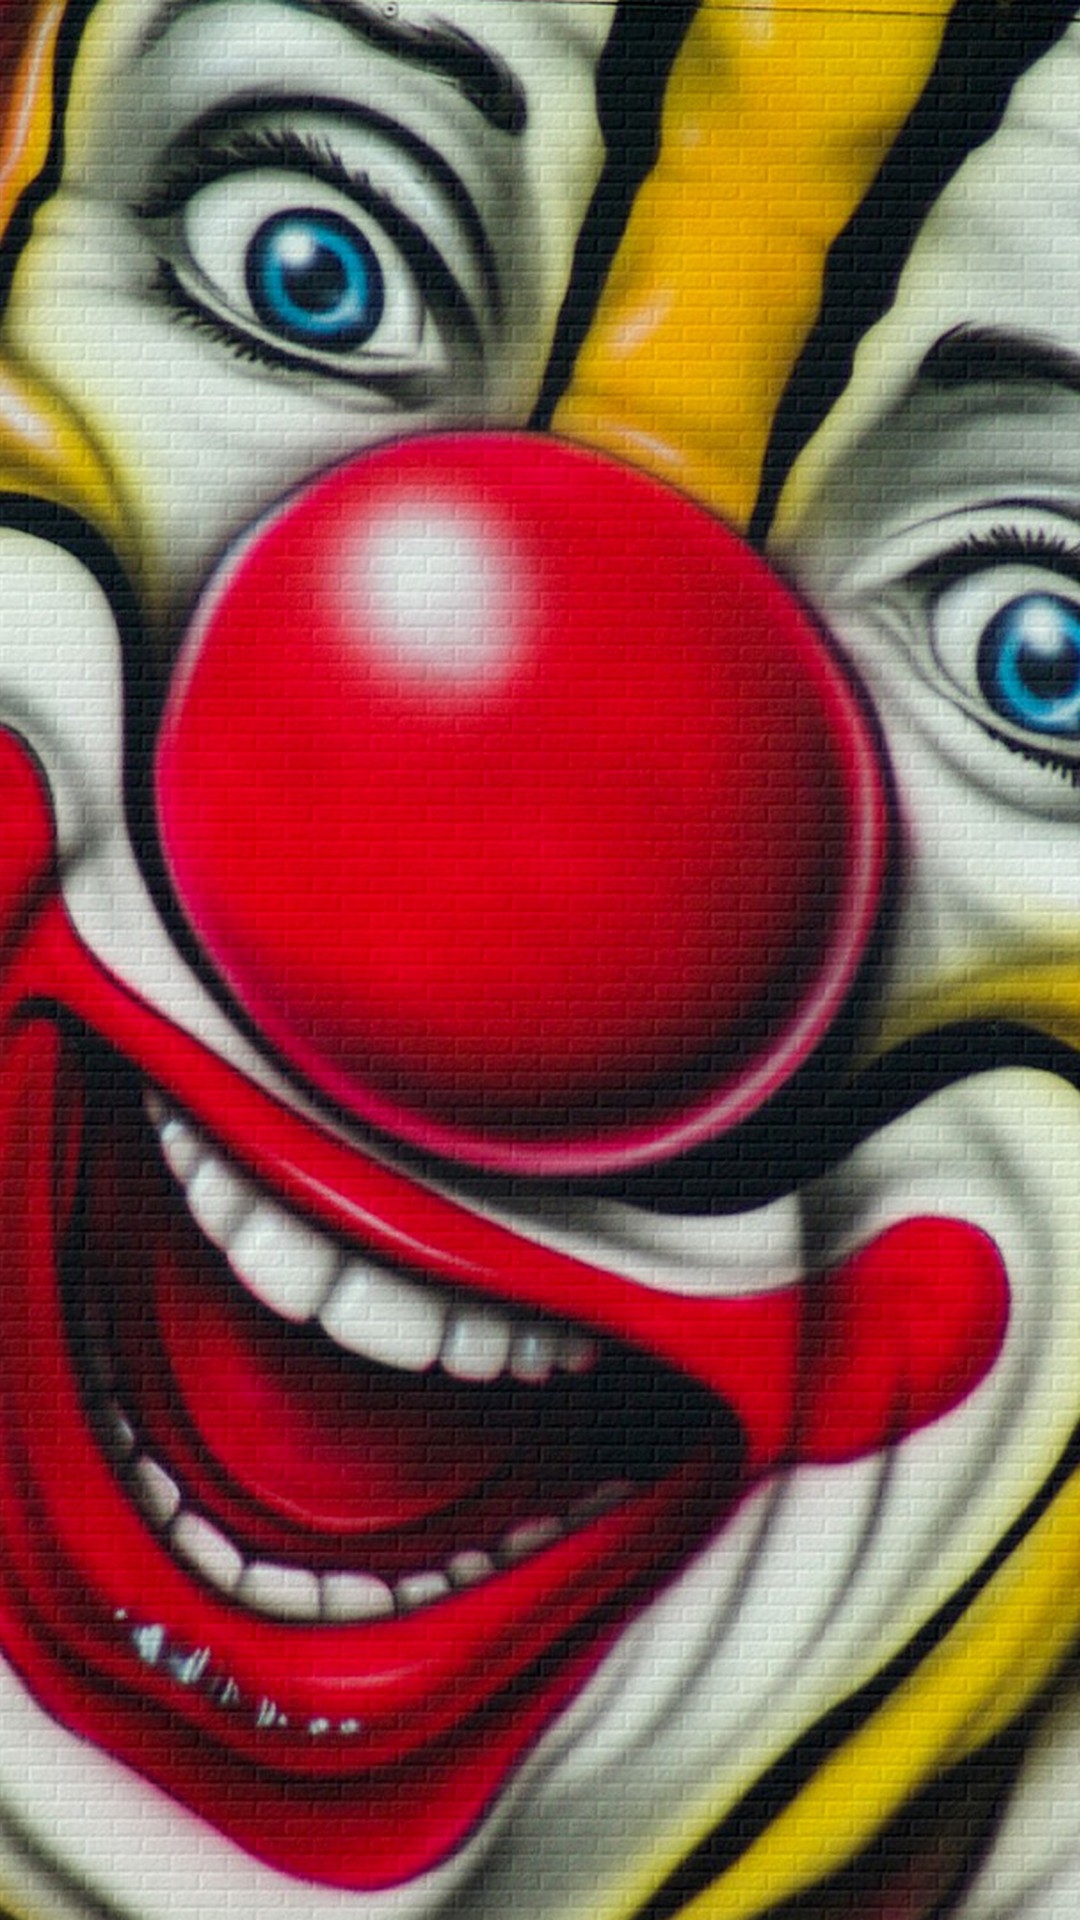 Graffiti Characters Wallpaper iPhone with resolution 1080X1920 pixel. You can make this wallpaper for your iPhone 5, 6, 7, 8, X backgrounds, Mobile Screensaver, or iPad Lock Screen